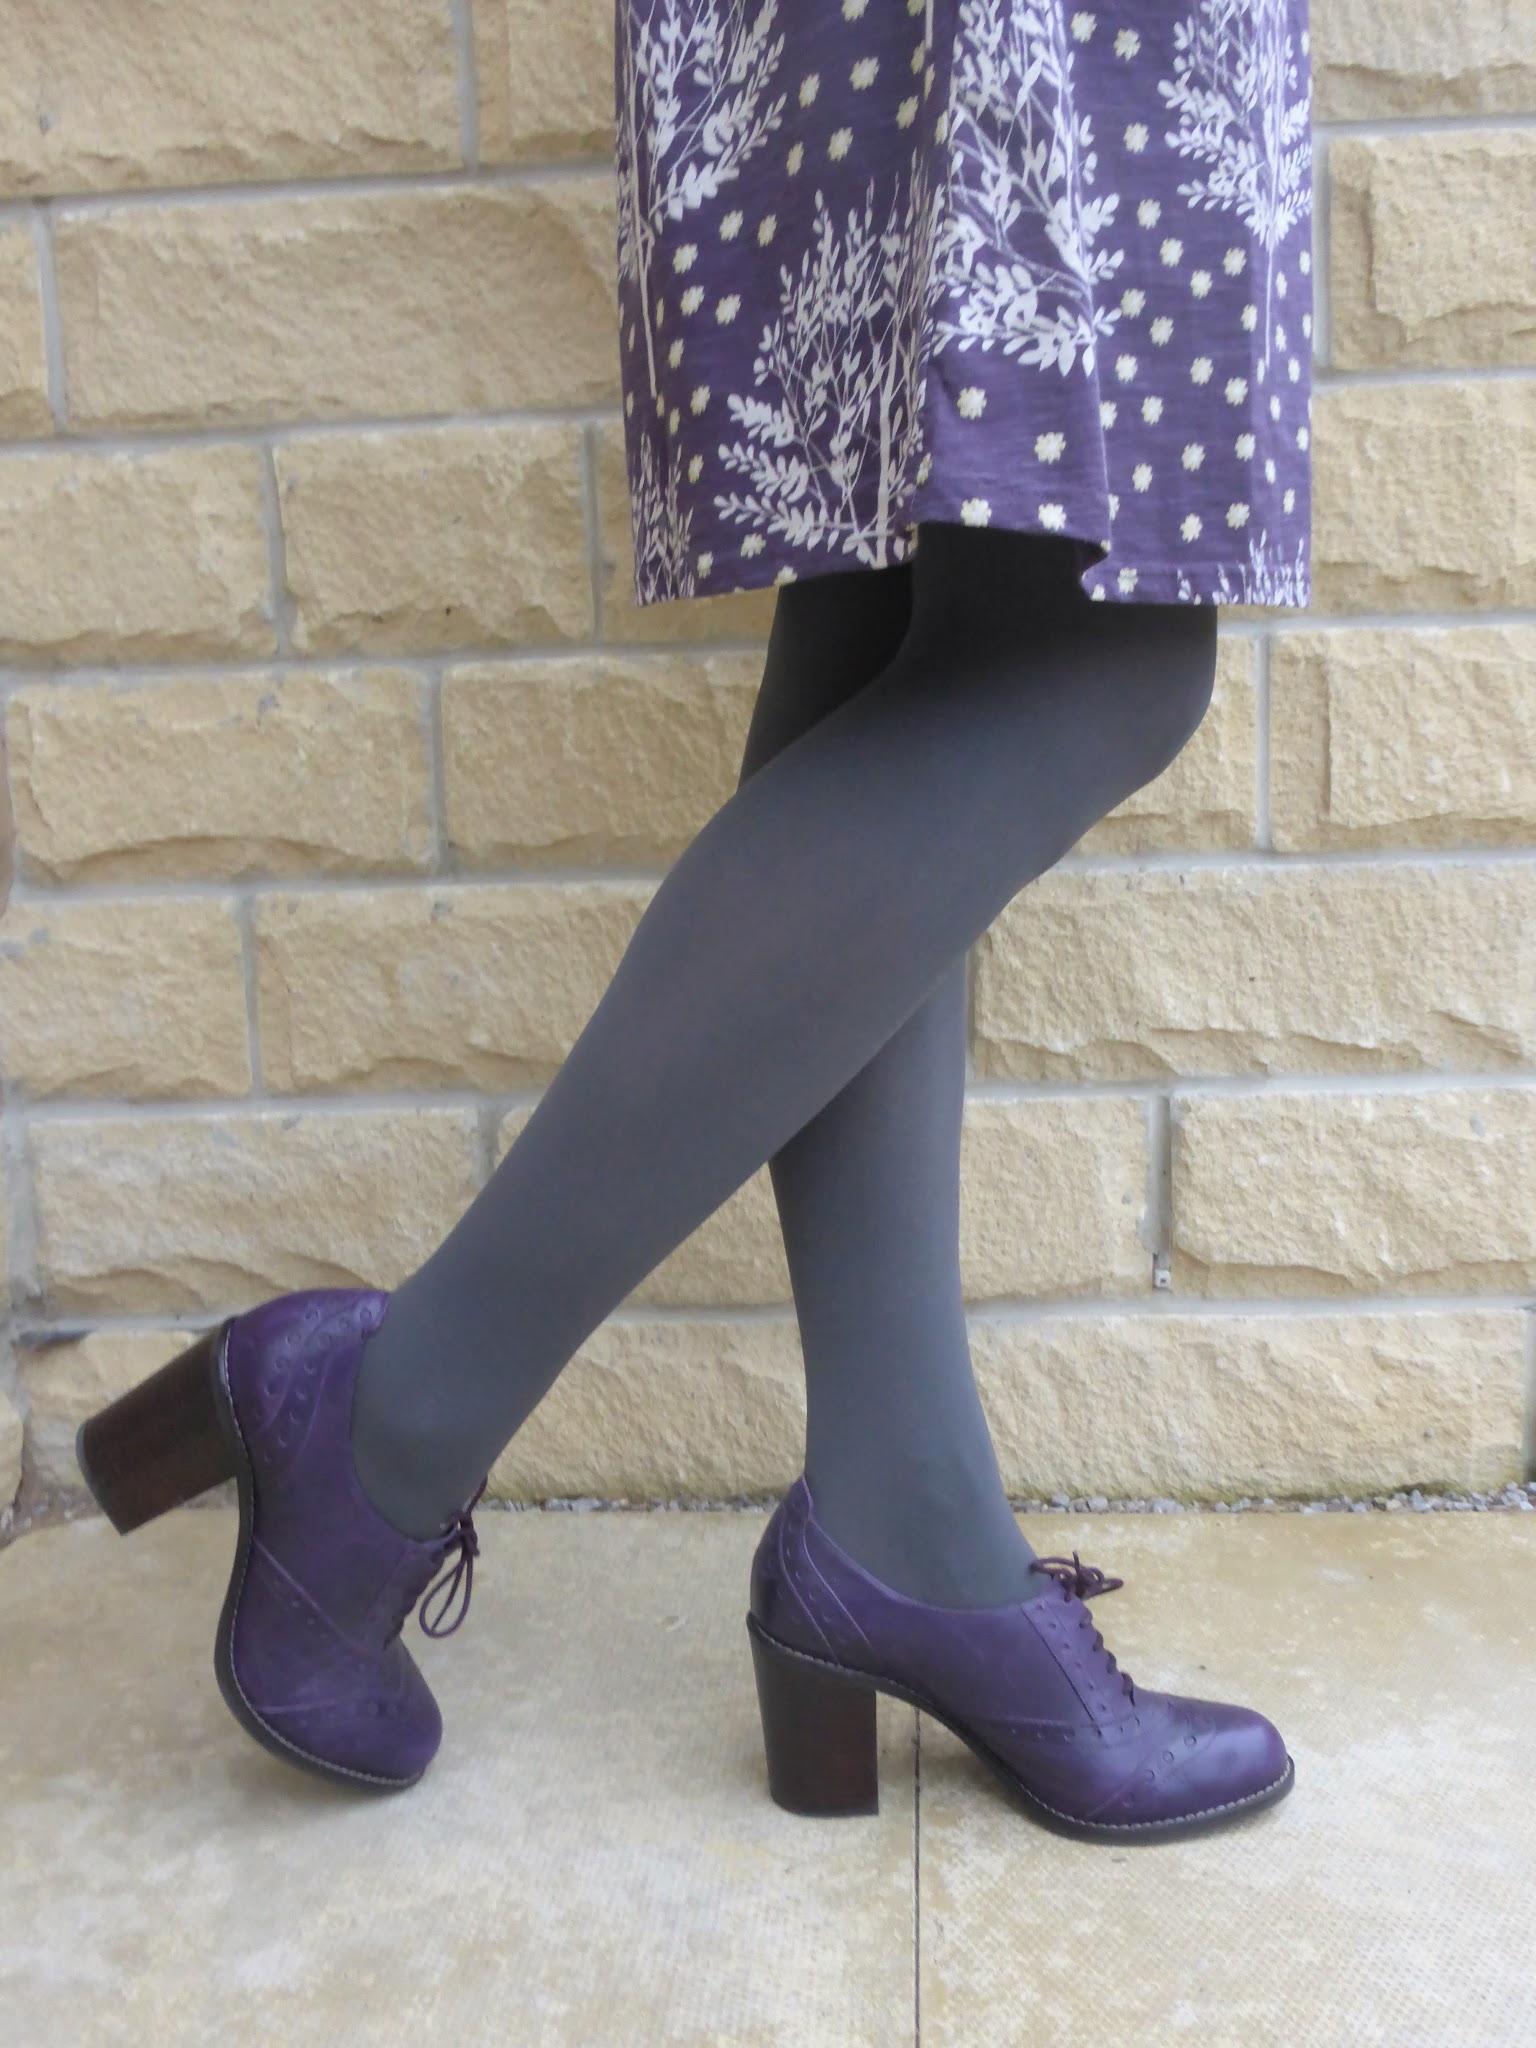 Outfit: Braintree Floral Dress and Purple Brogues. - What Lizzy Loves